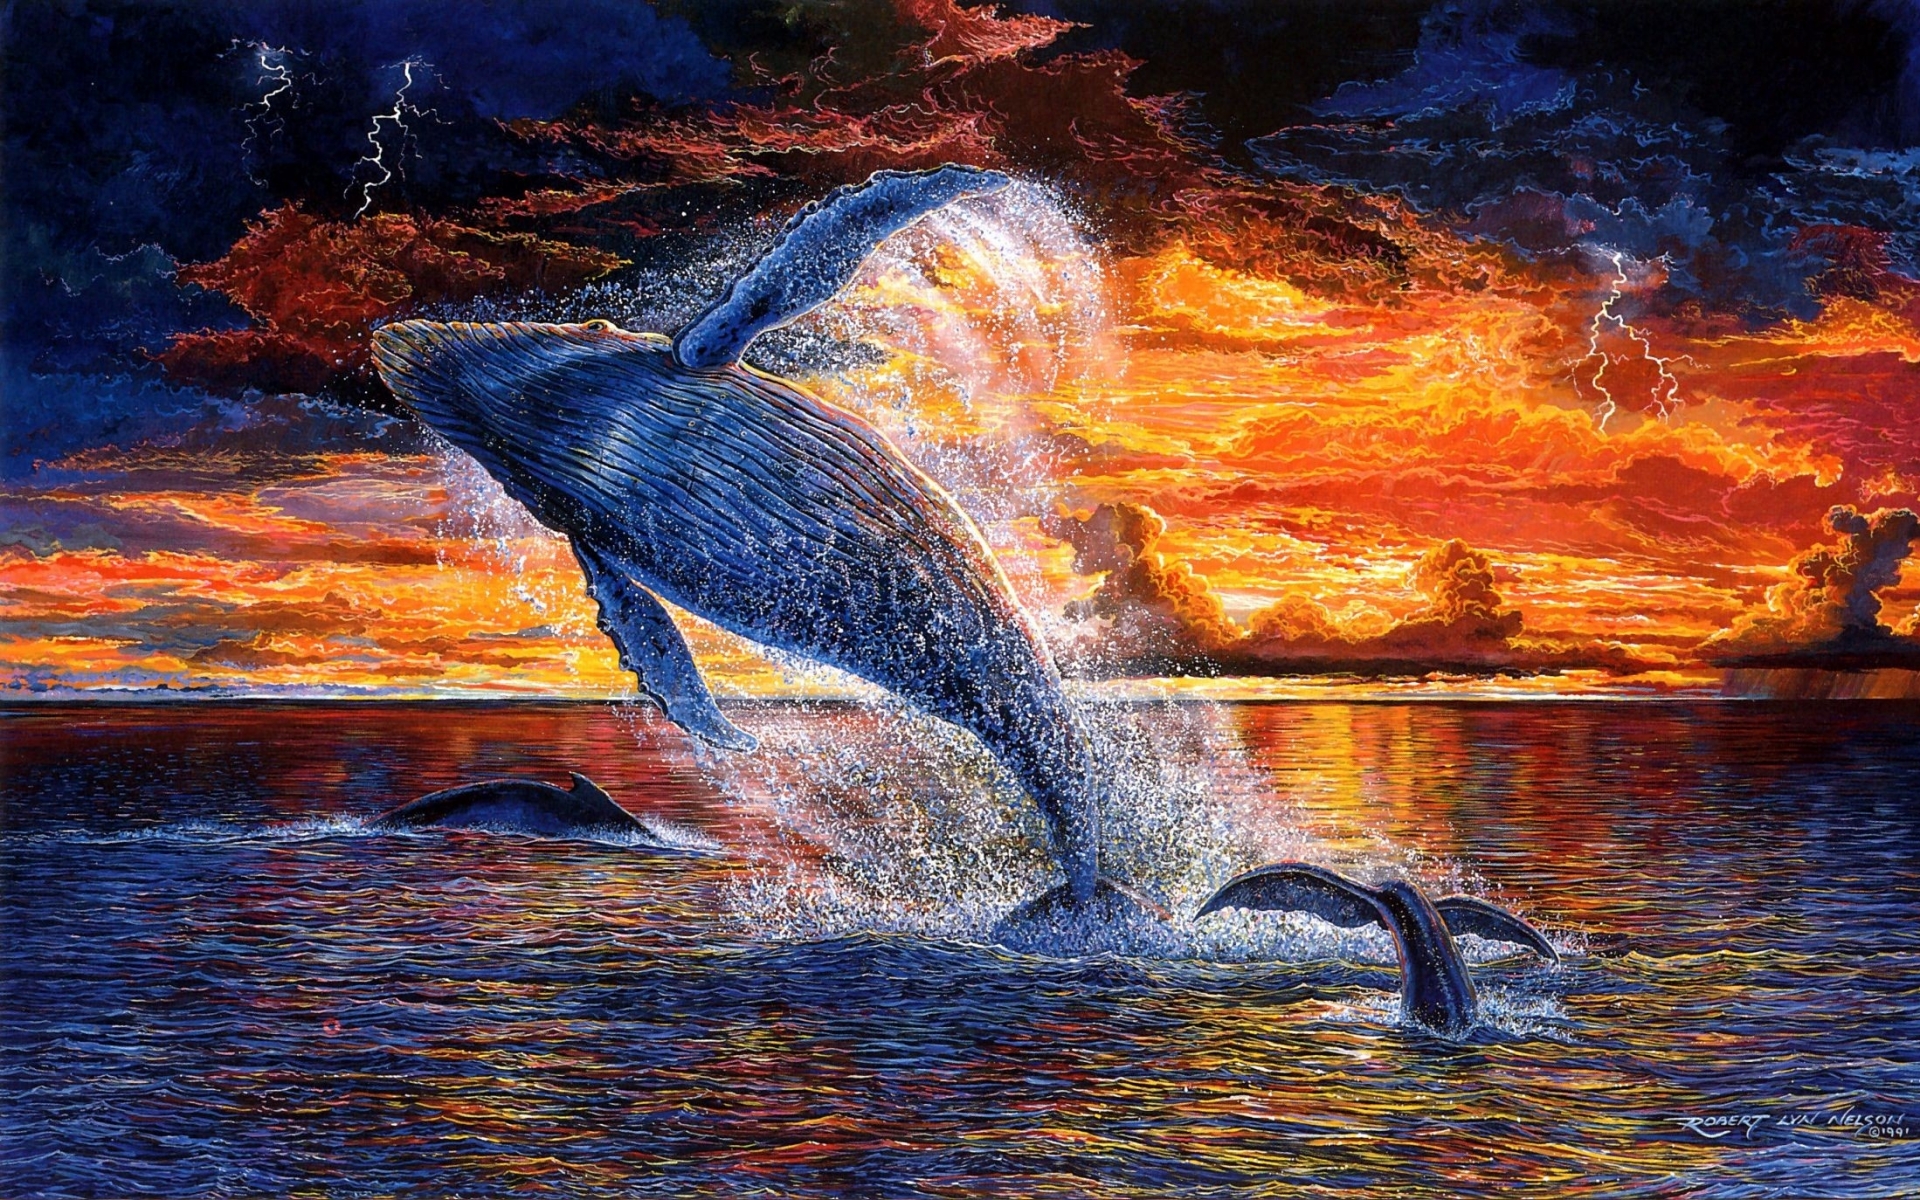 robert lyn nelson, Paintings, Artisticanimals, Whales, Colors, Fly, Flight, Flying, Sunset, Nature, Ocean, Sea, Skies, Clouds Wallpaper